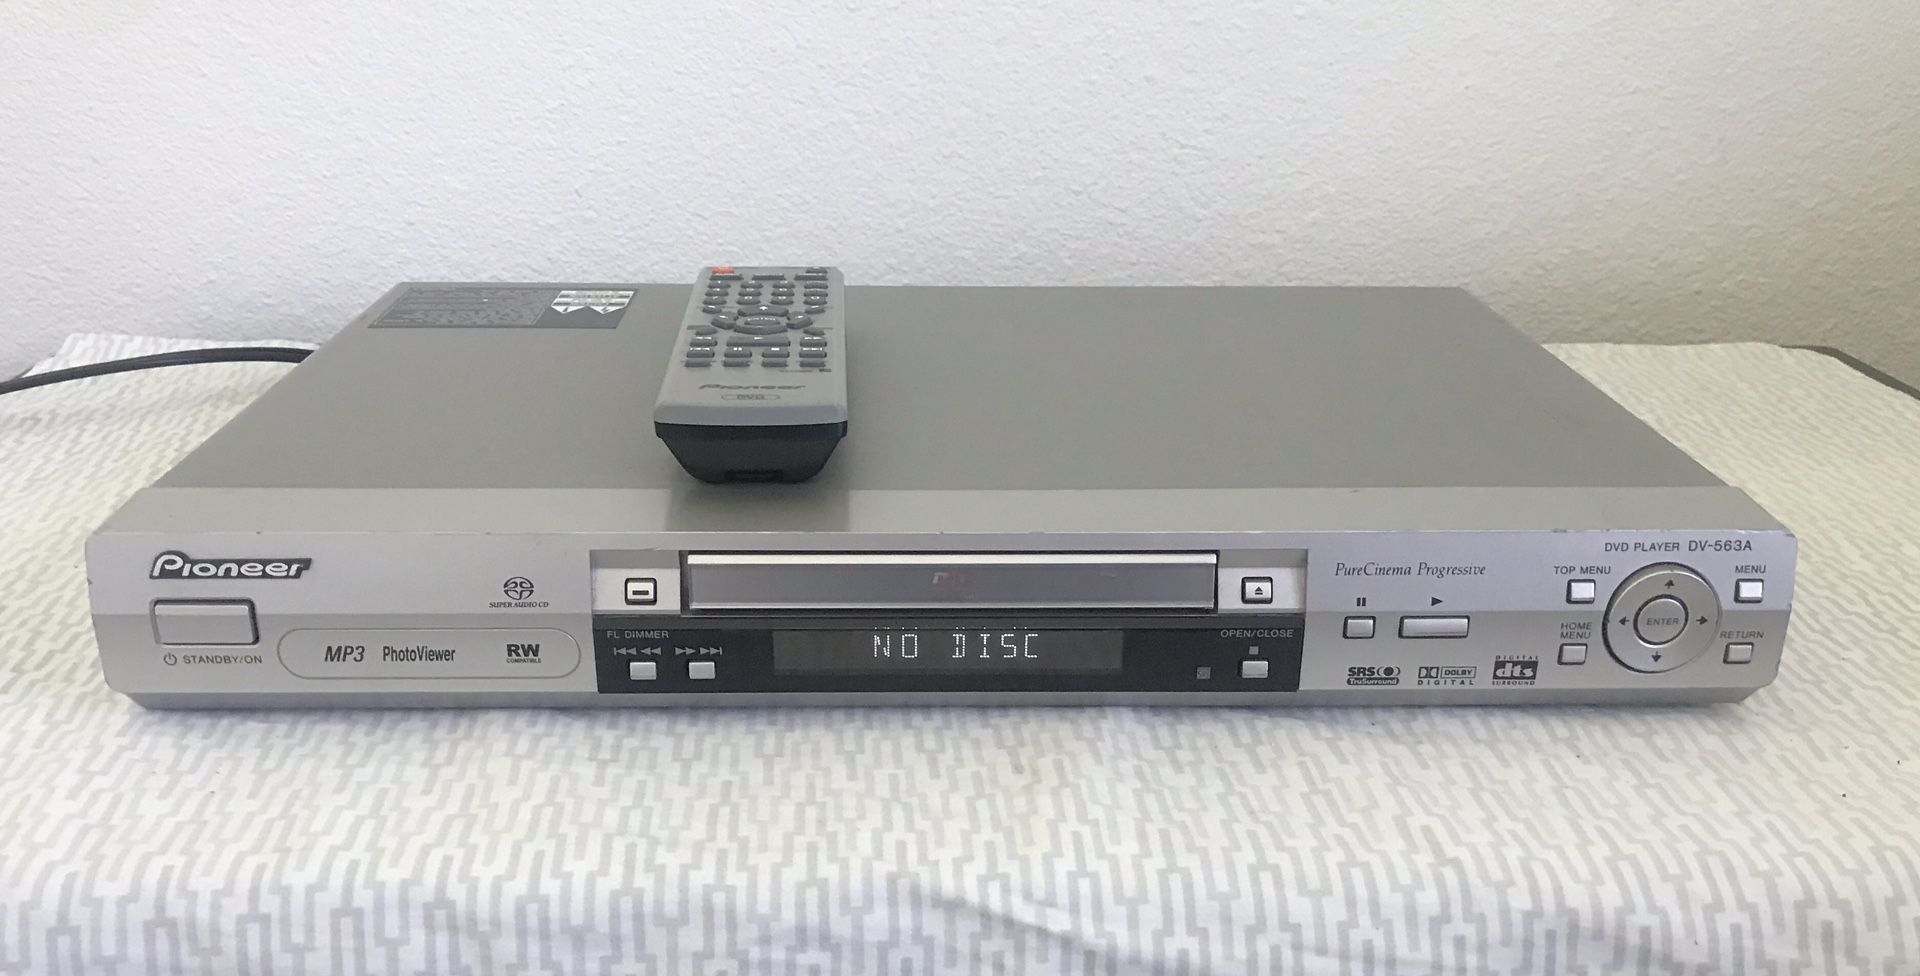 Pioneer DV-563A Universal MP3/DVD/CD/SACD/DVDA Player With Remote. Working Unit